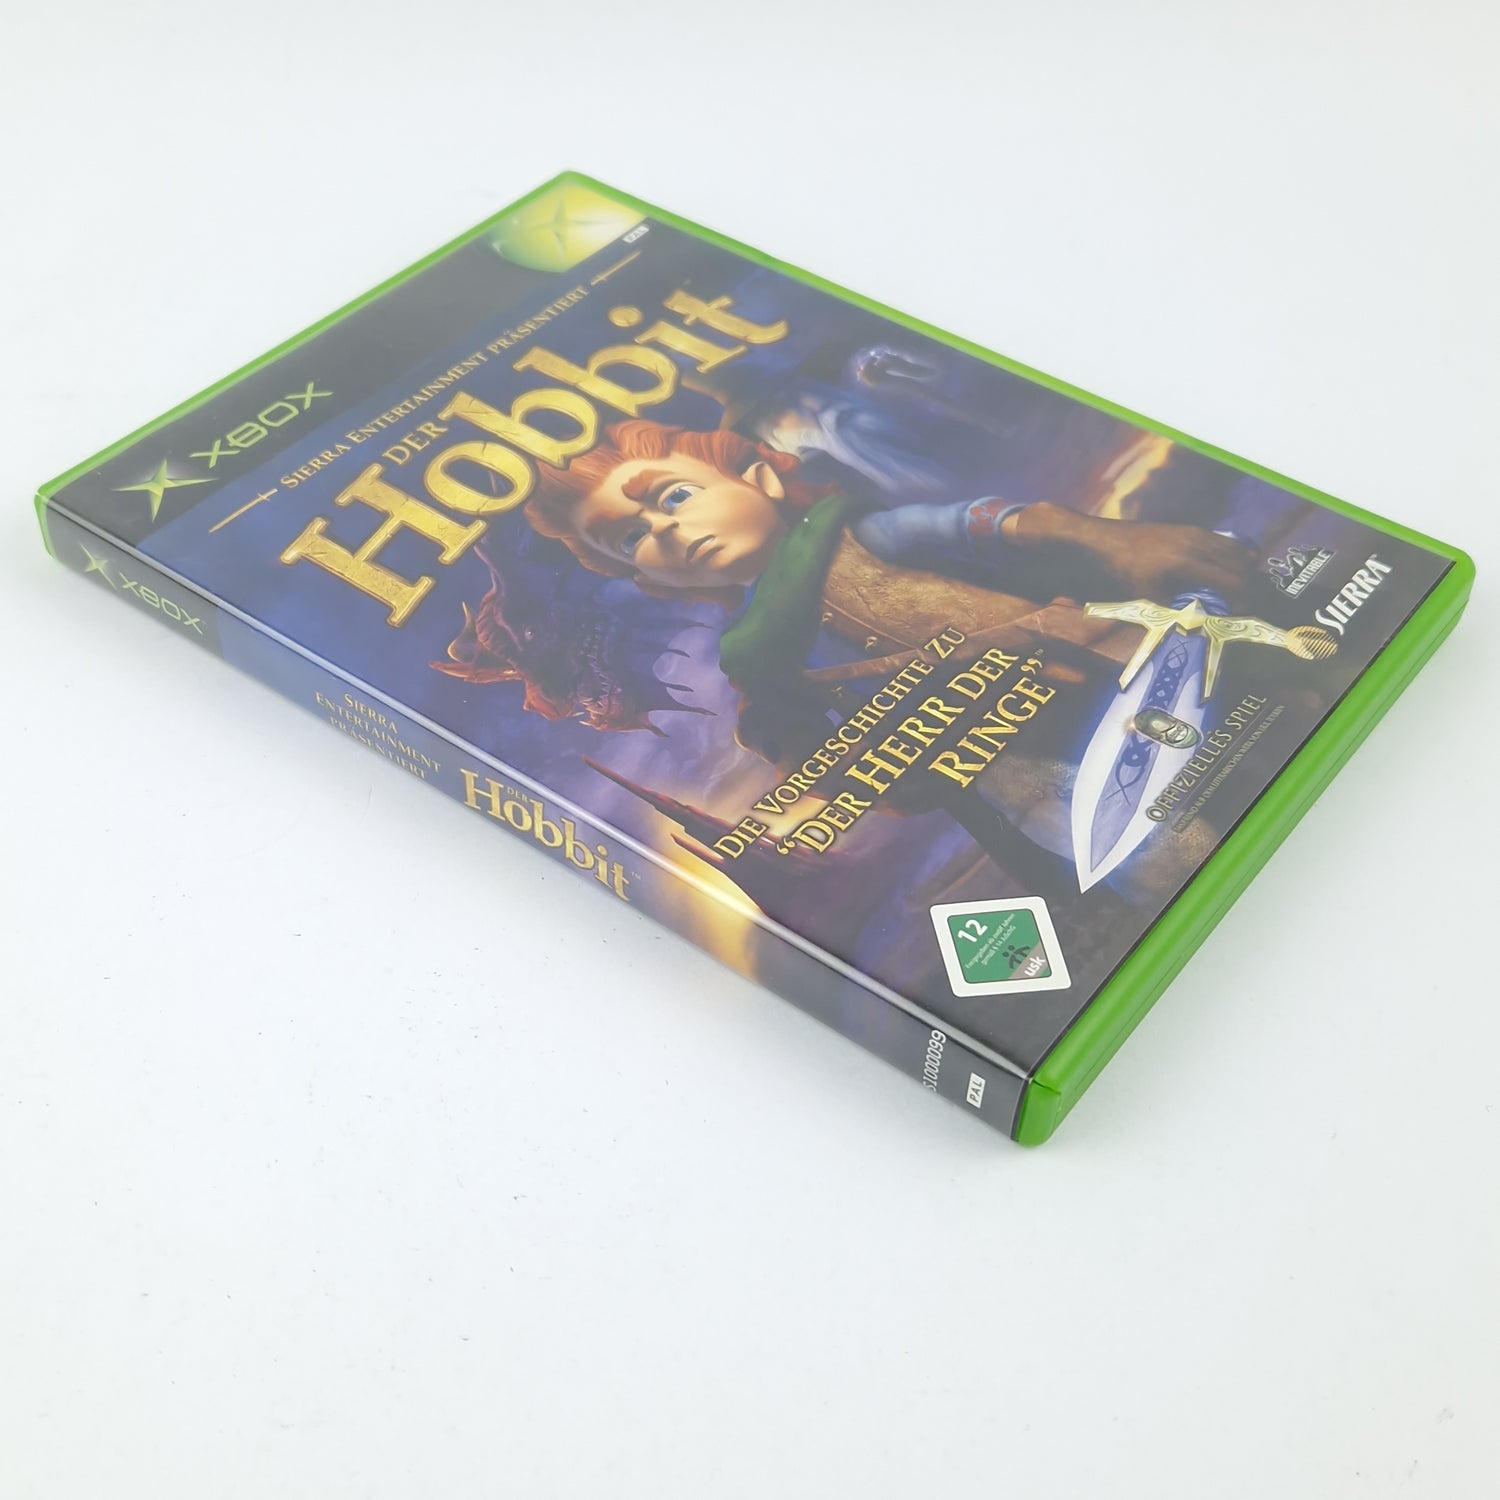 Xbox Classic Game: The Hobbit (Prequel Lord of the Rings) Microsoft OVP PAL